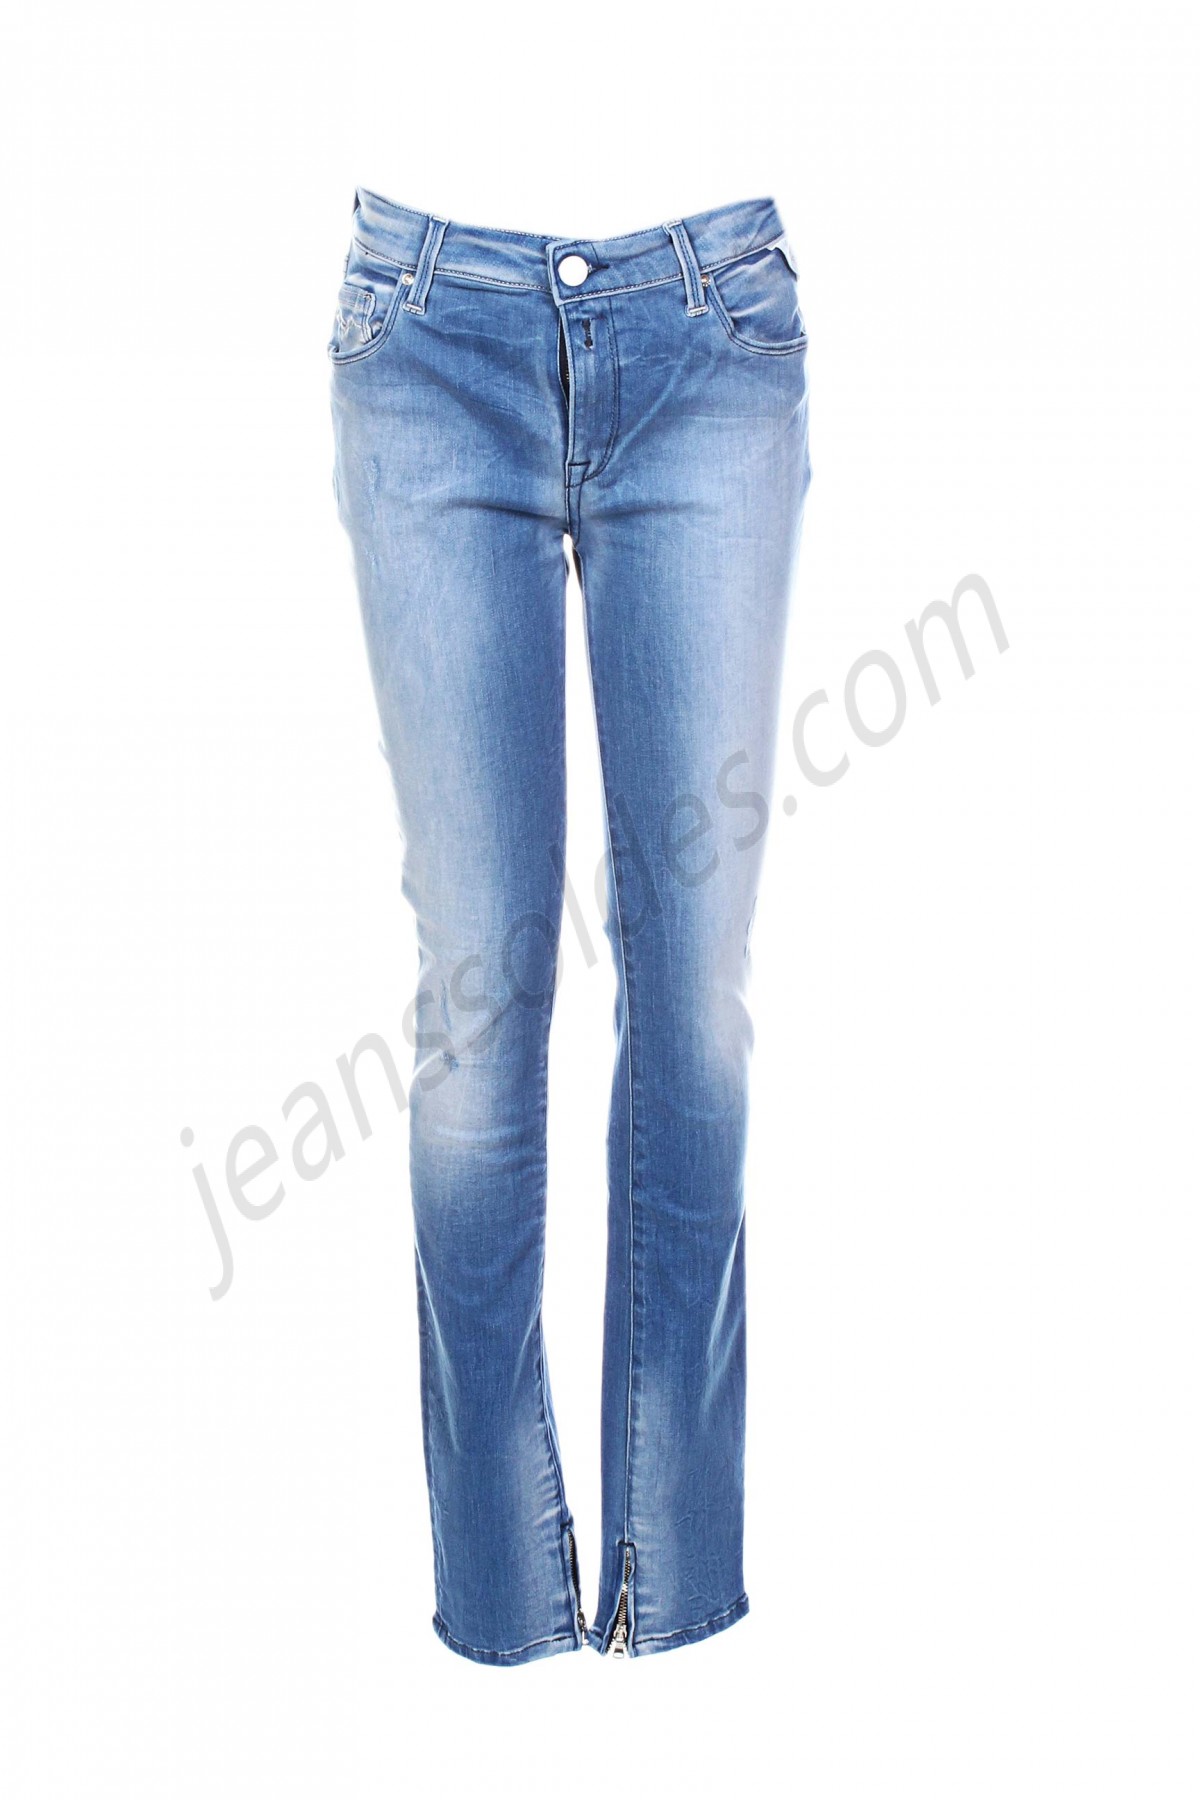 replay-Jeans coupe slim prix d’amis - -0